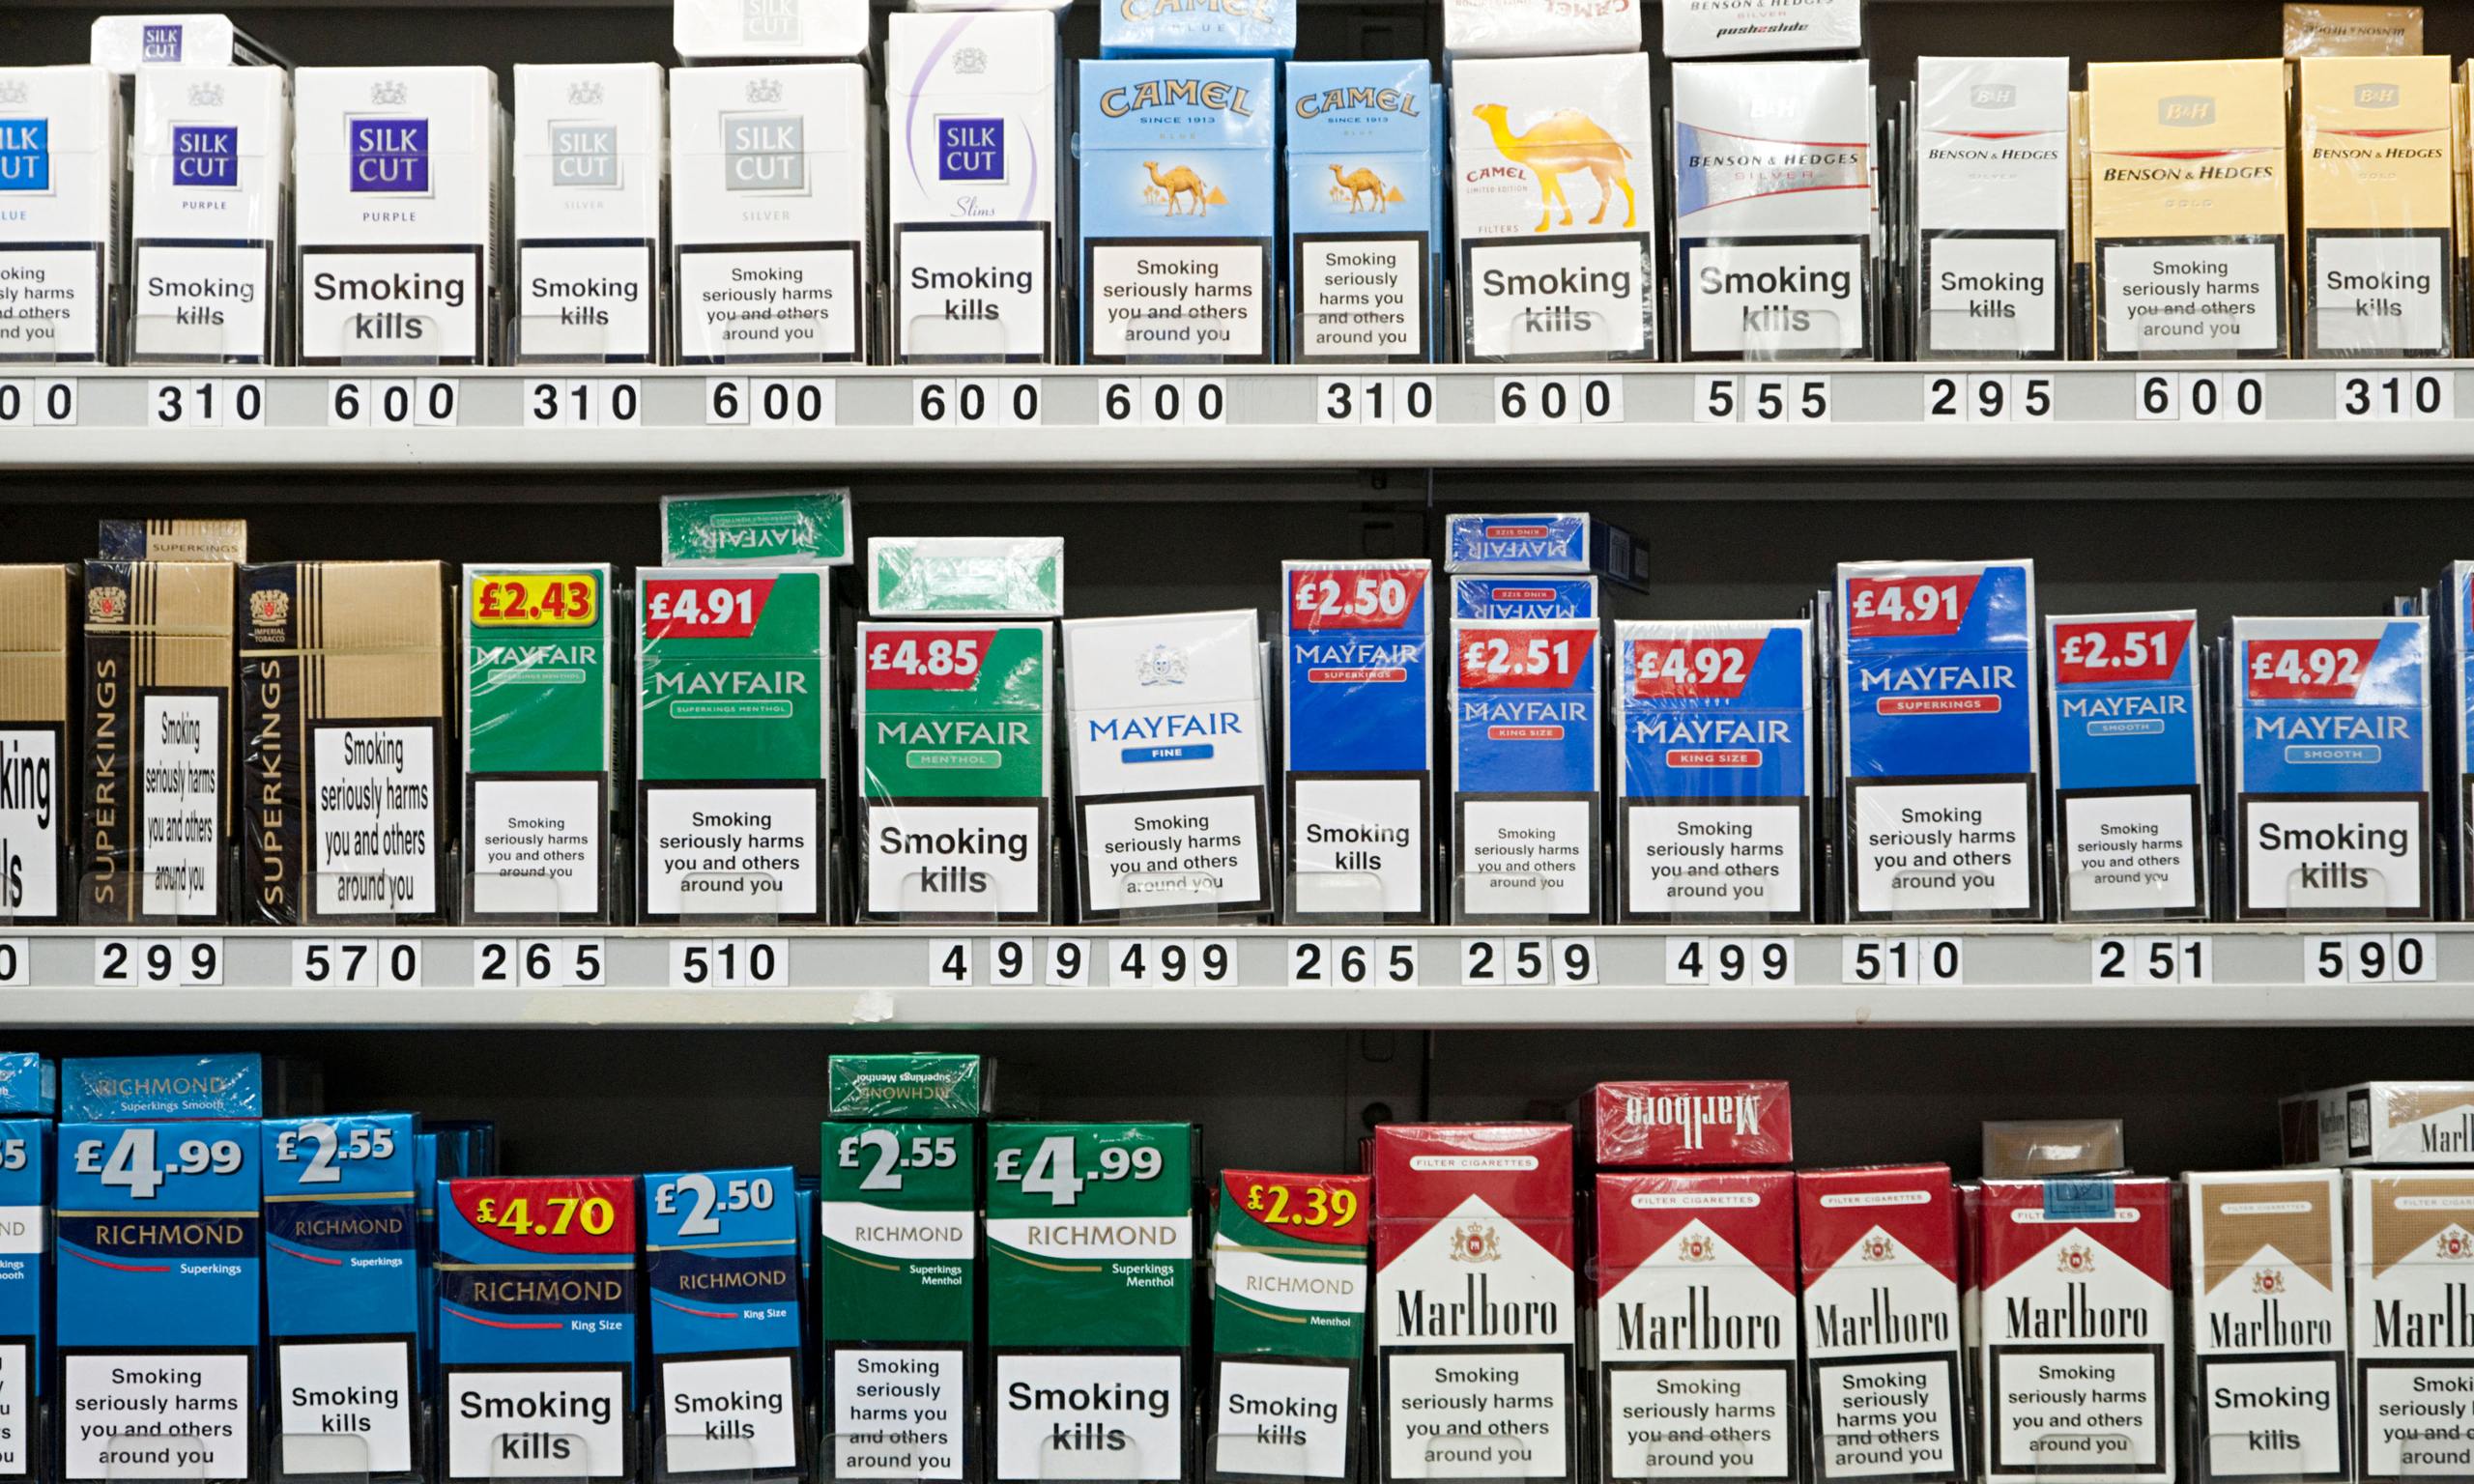 England to introduce plain packaging for cigarettes